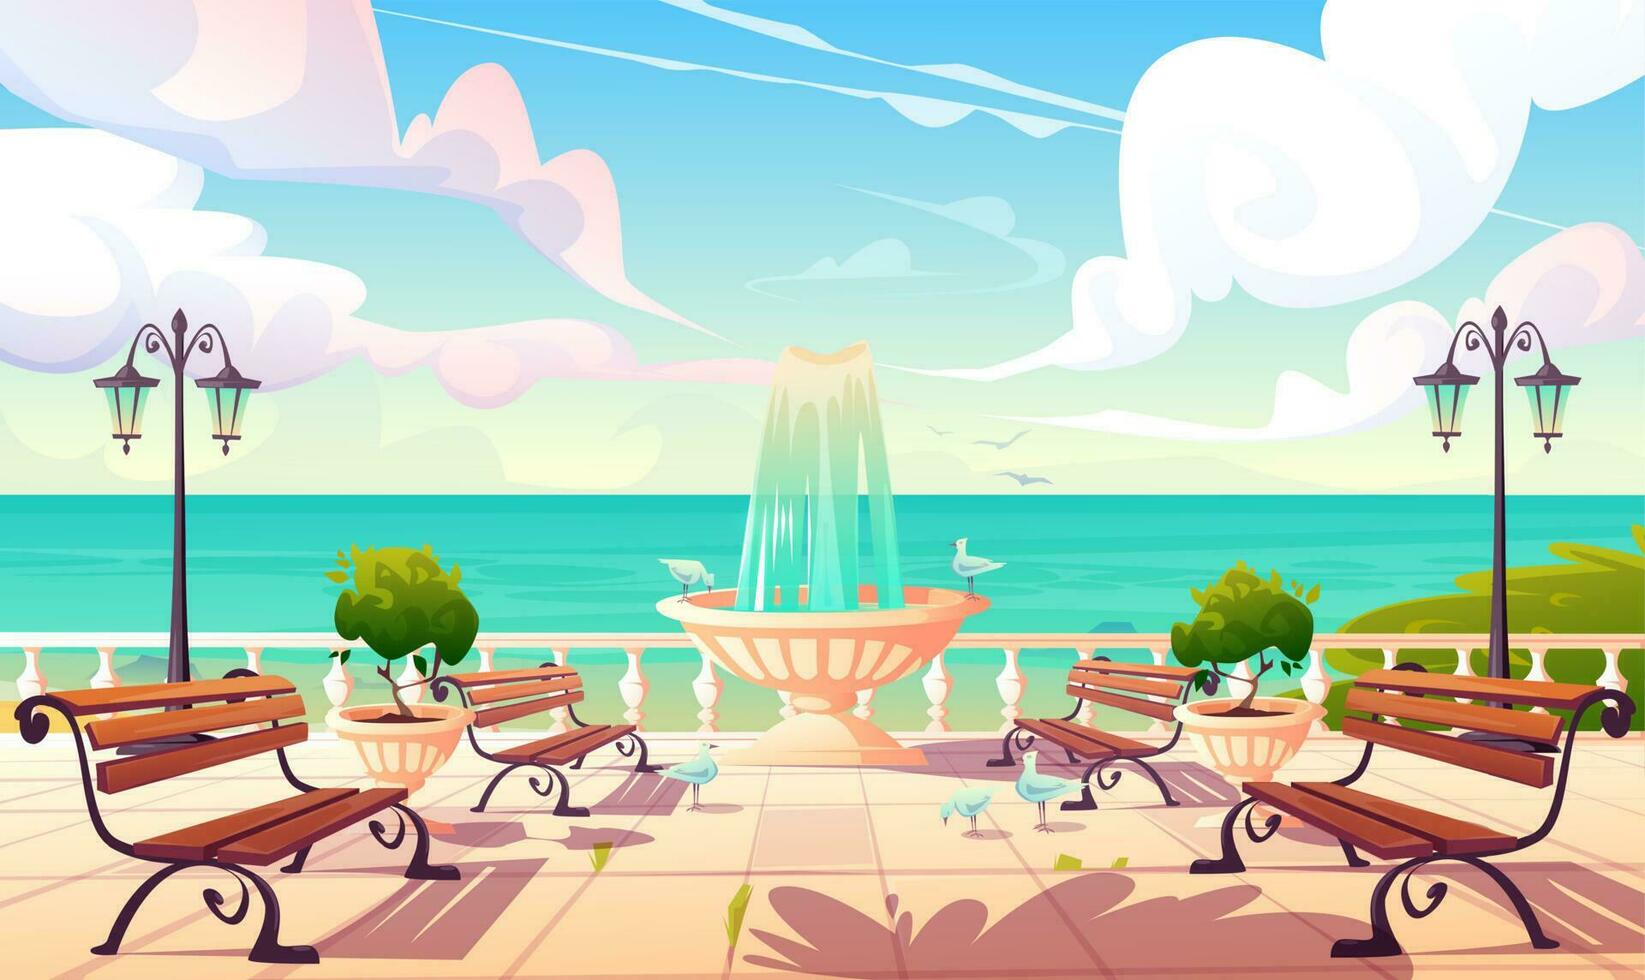 Summer seafront with fountain and benches vector